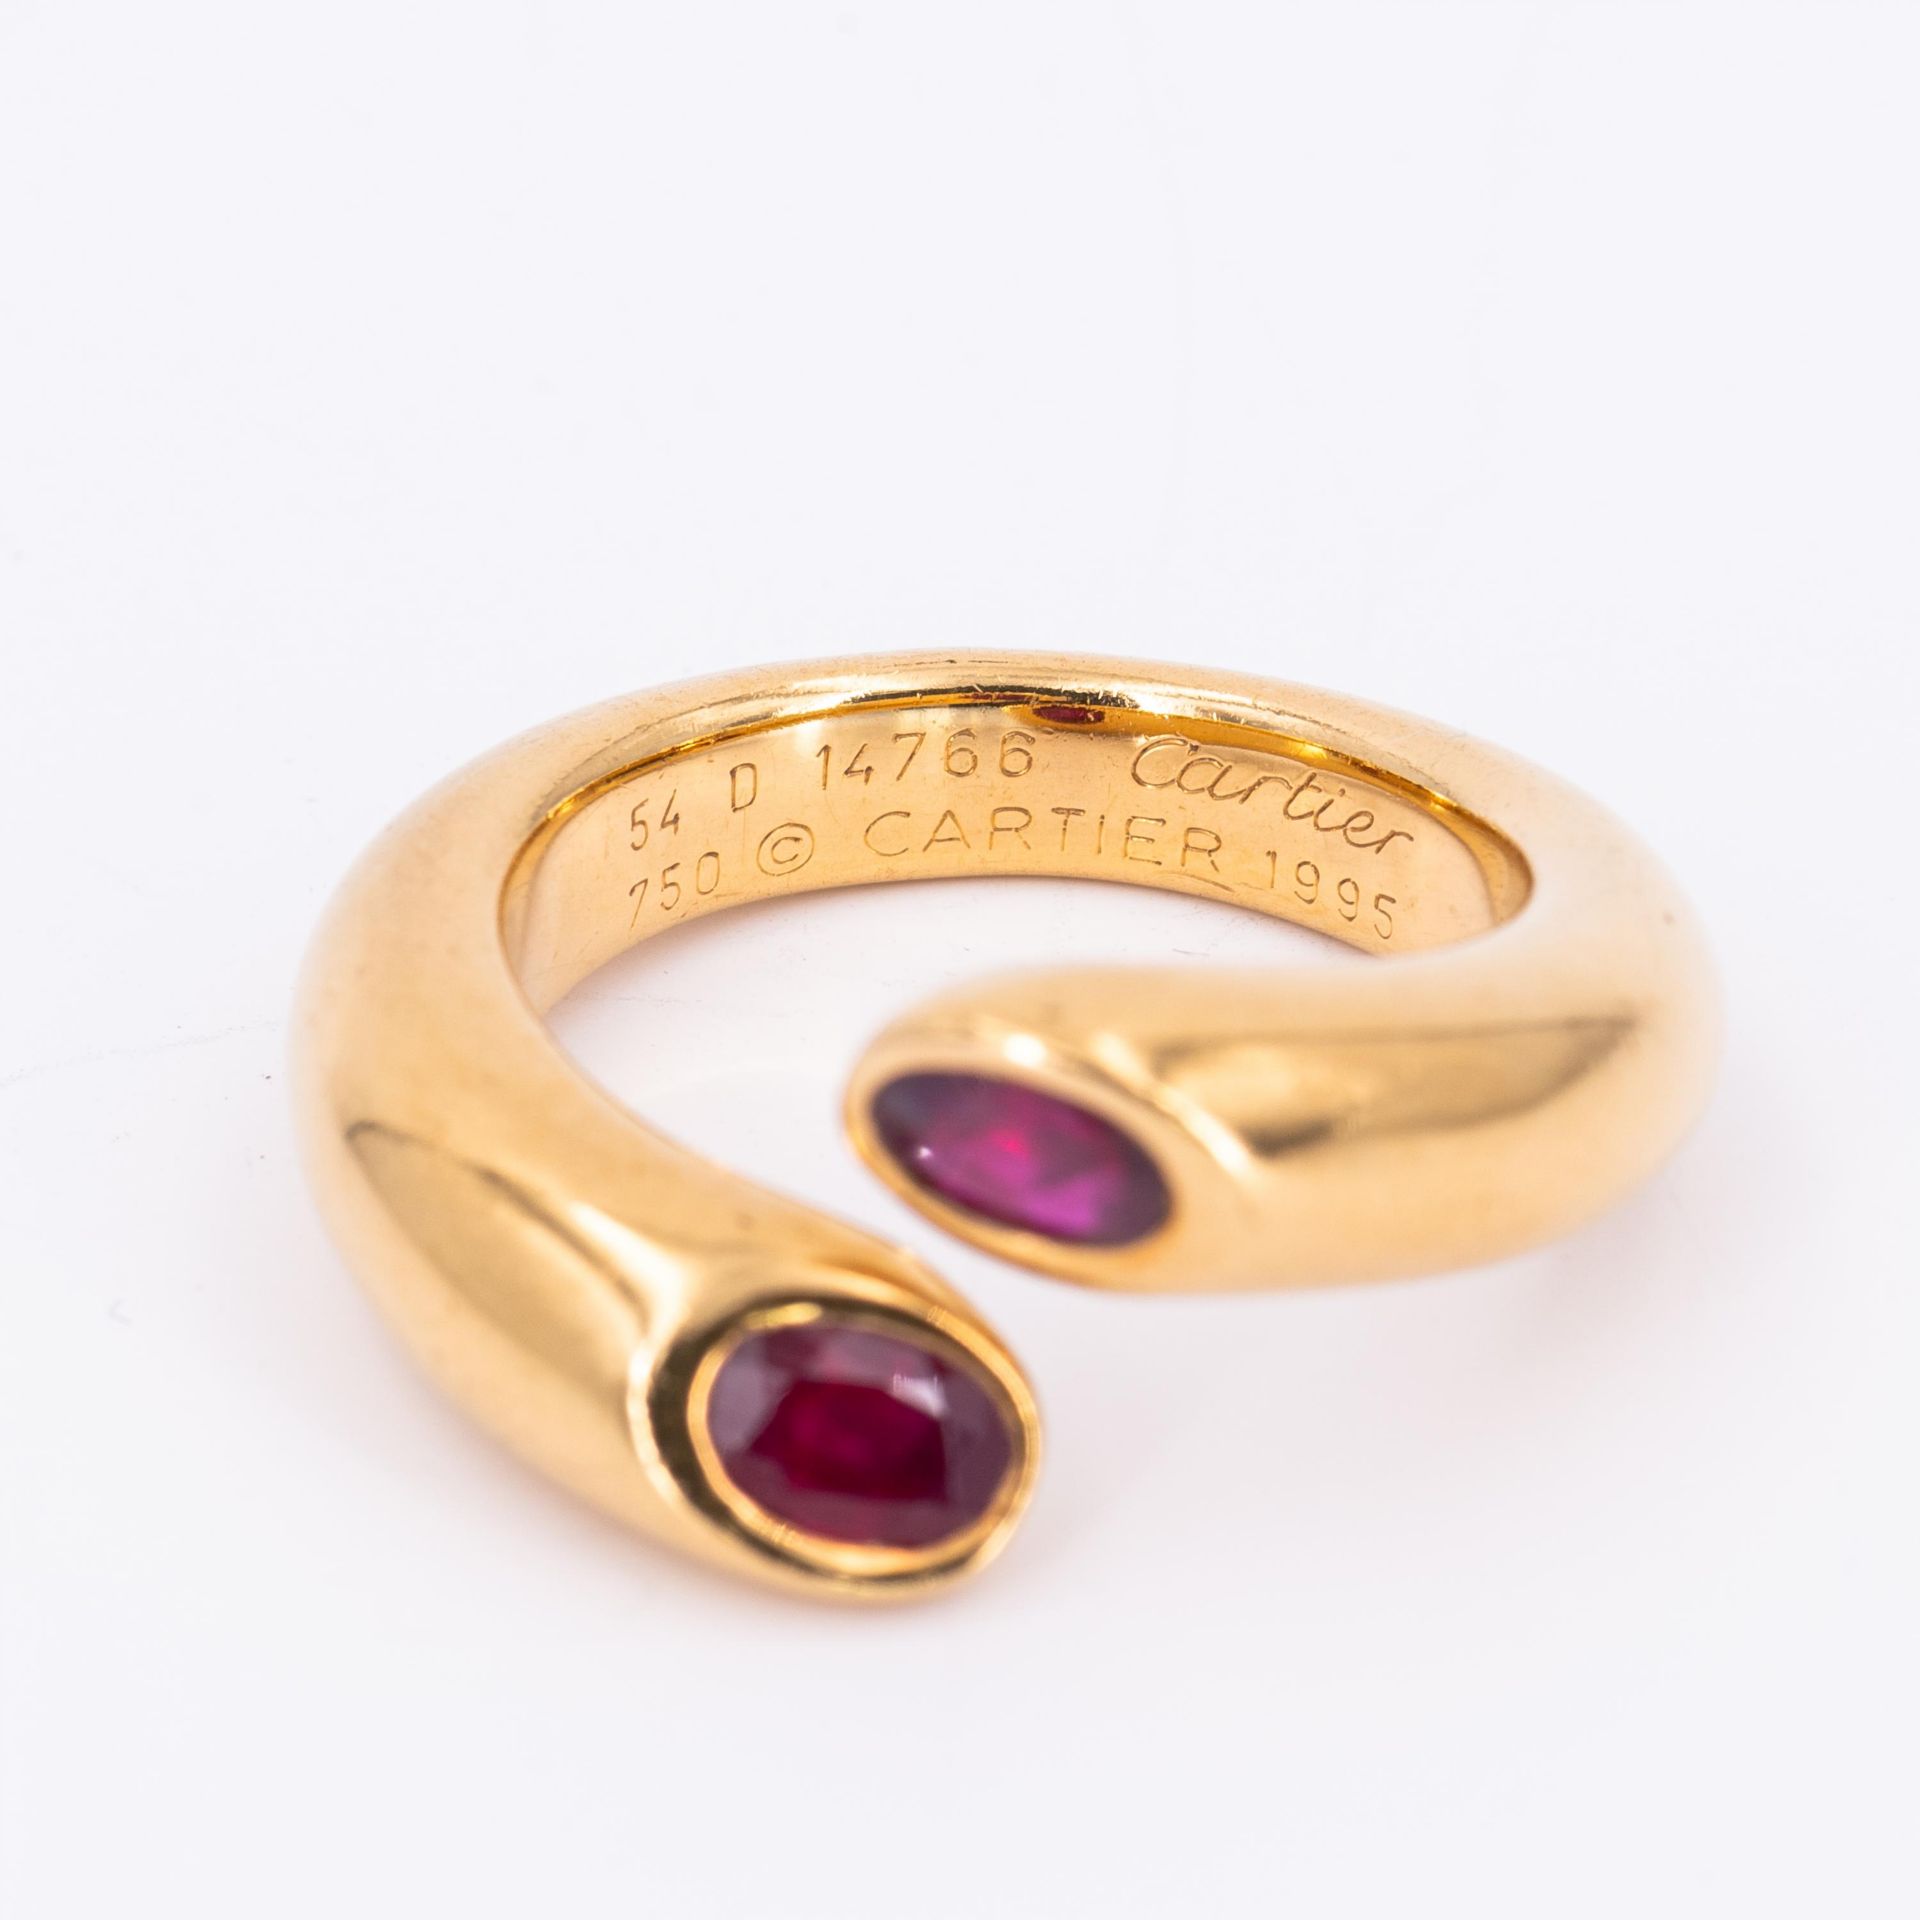 Cartier: Ruby-Ring - Image 6 of 6